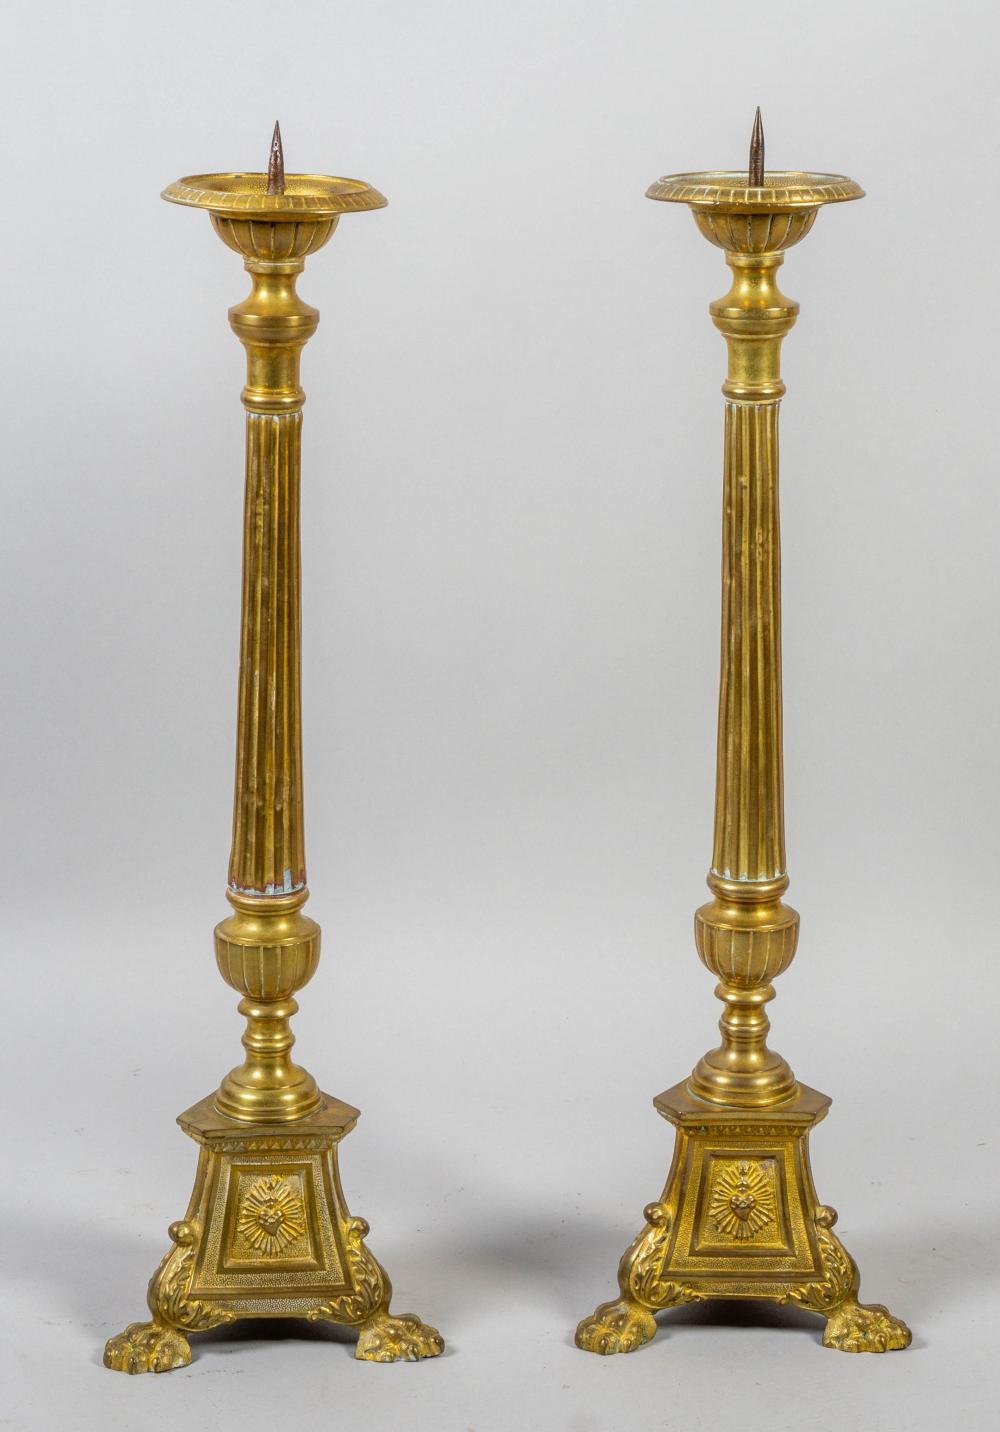 PAIR OF BAROQUE STYLE CAST BRASS